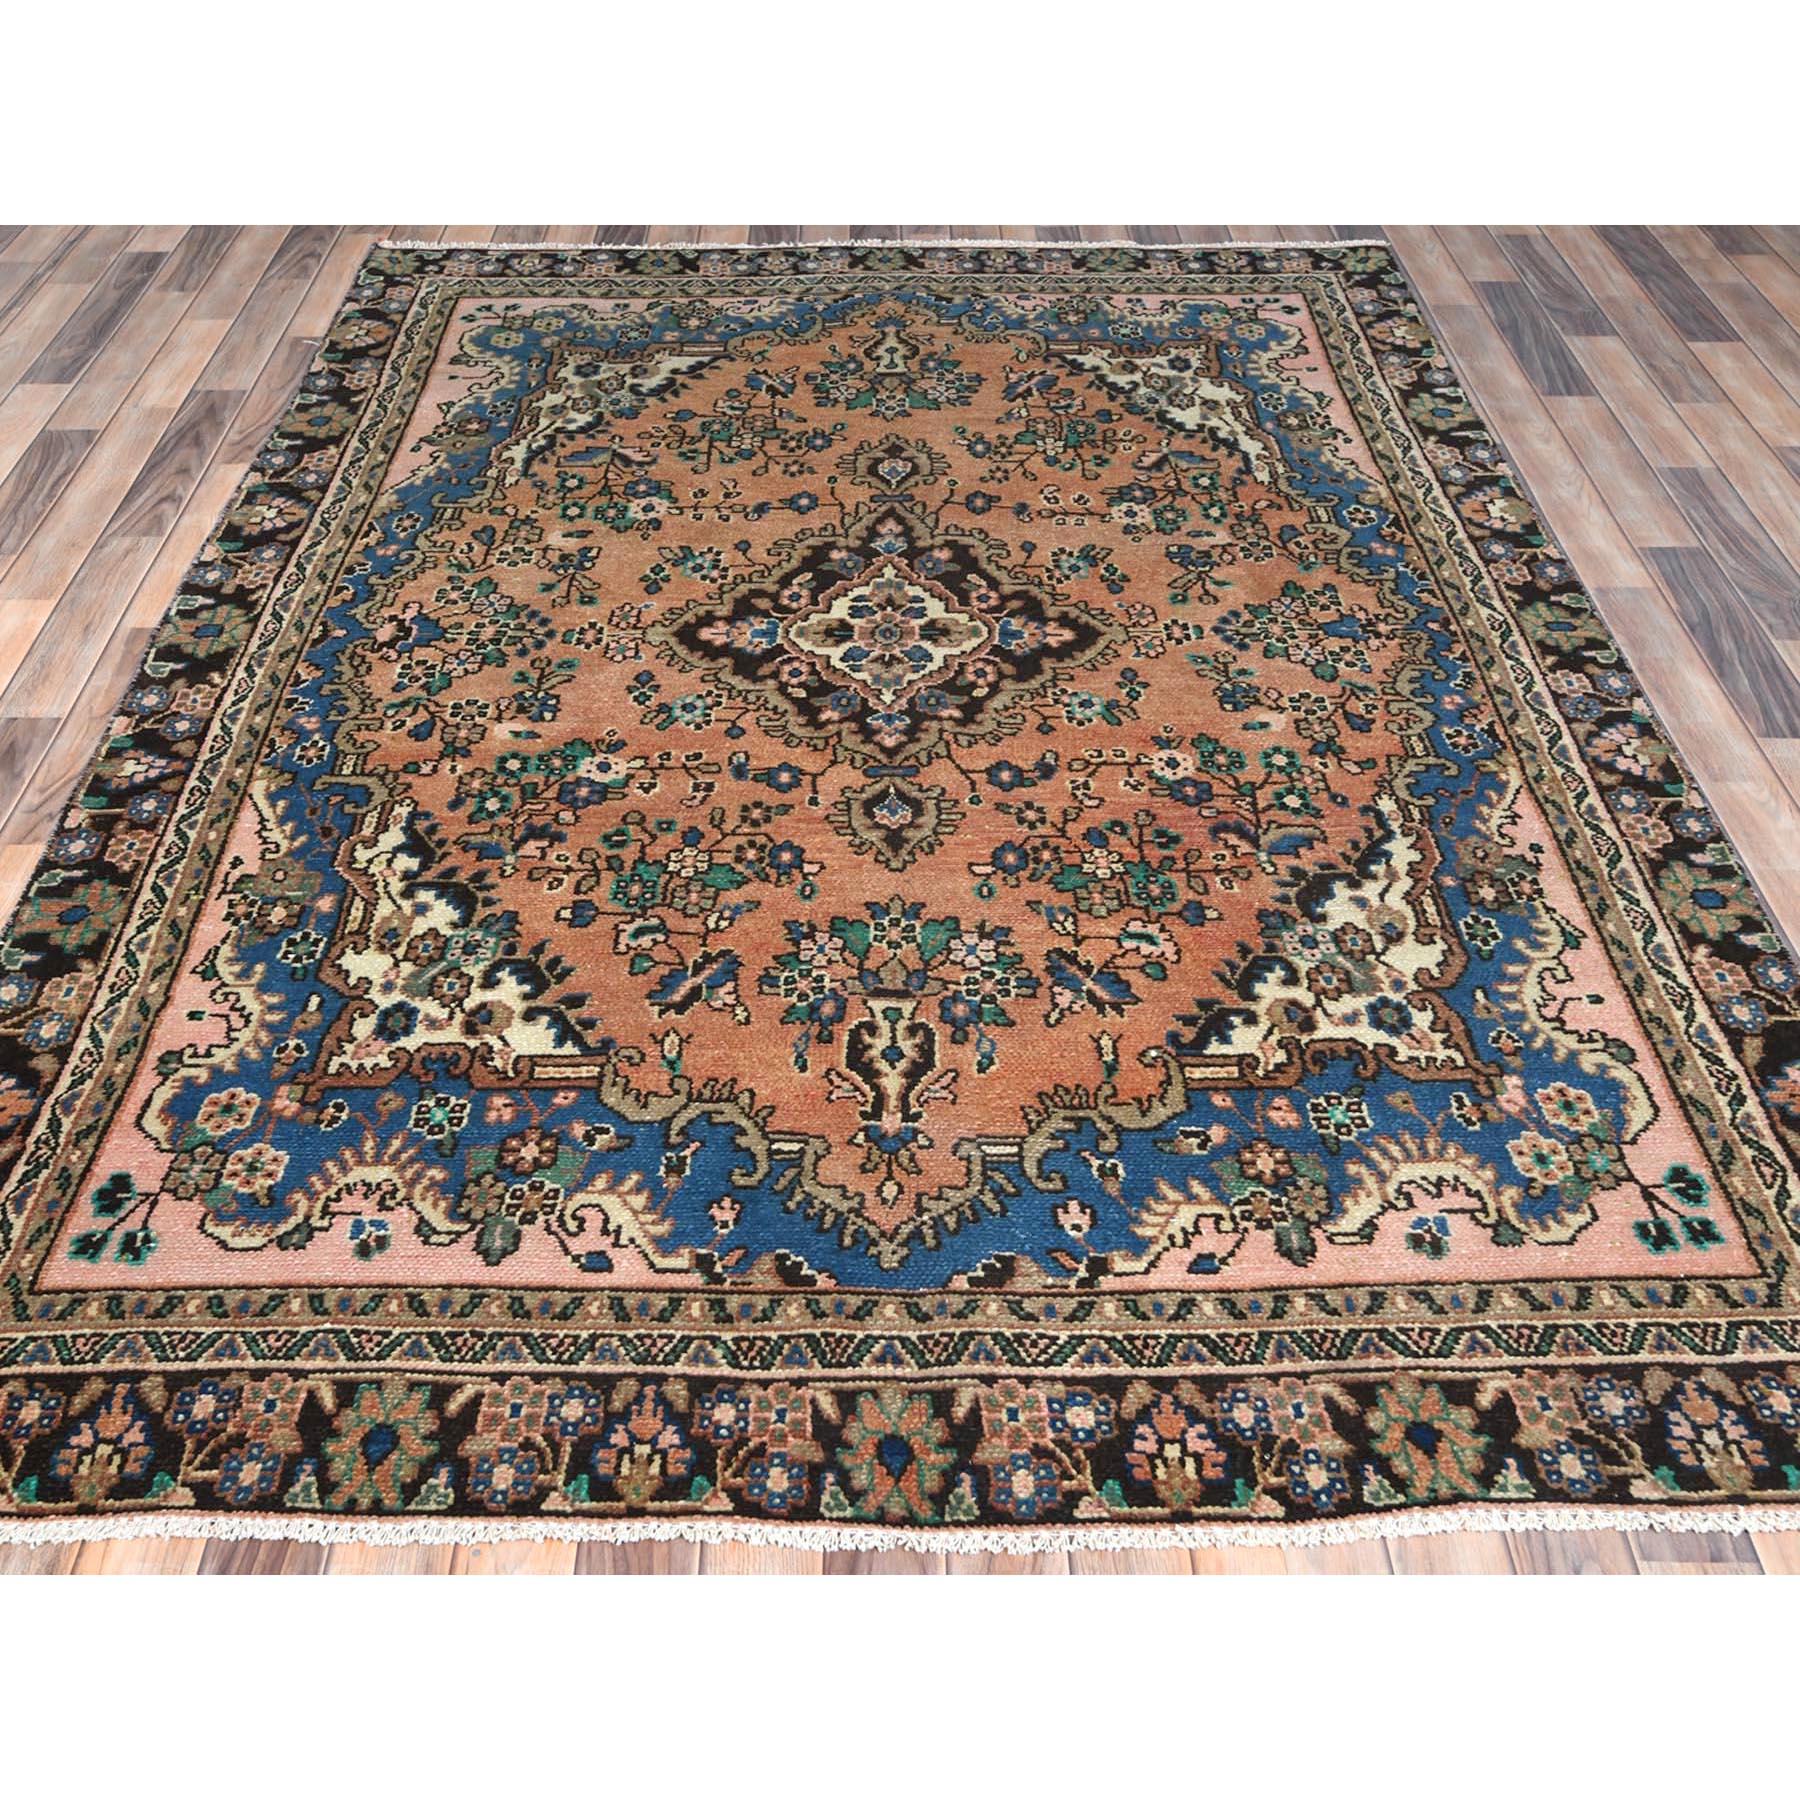 Medieval Peach Color, Distressed Worn Wool Hand Knotted, Vintage Persian Bibikabad Rug For Sale